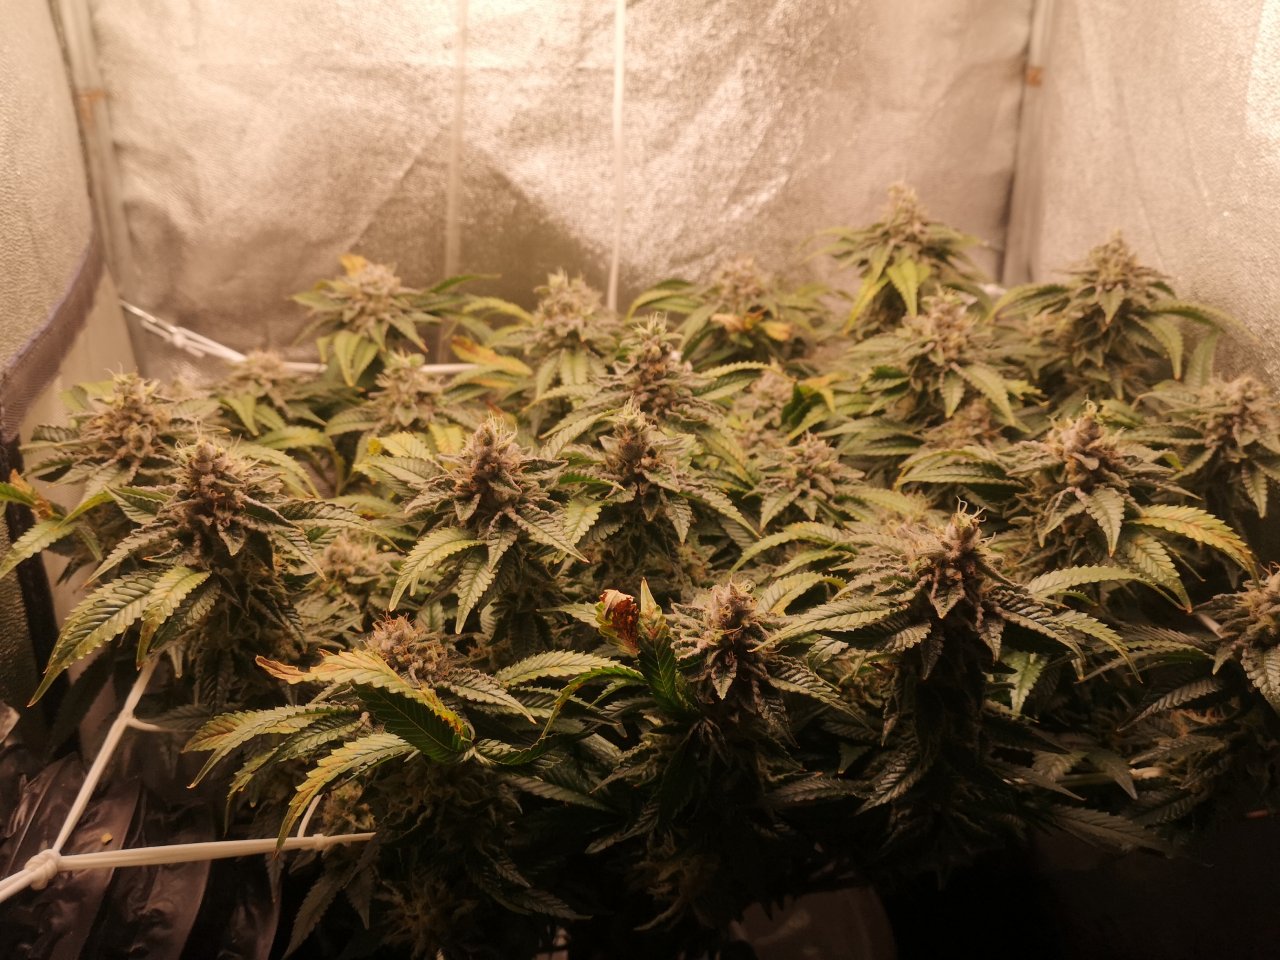 Blue Cheese - w8d2 - 10/12 ripening - overview